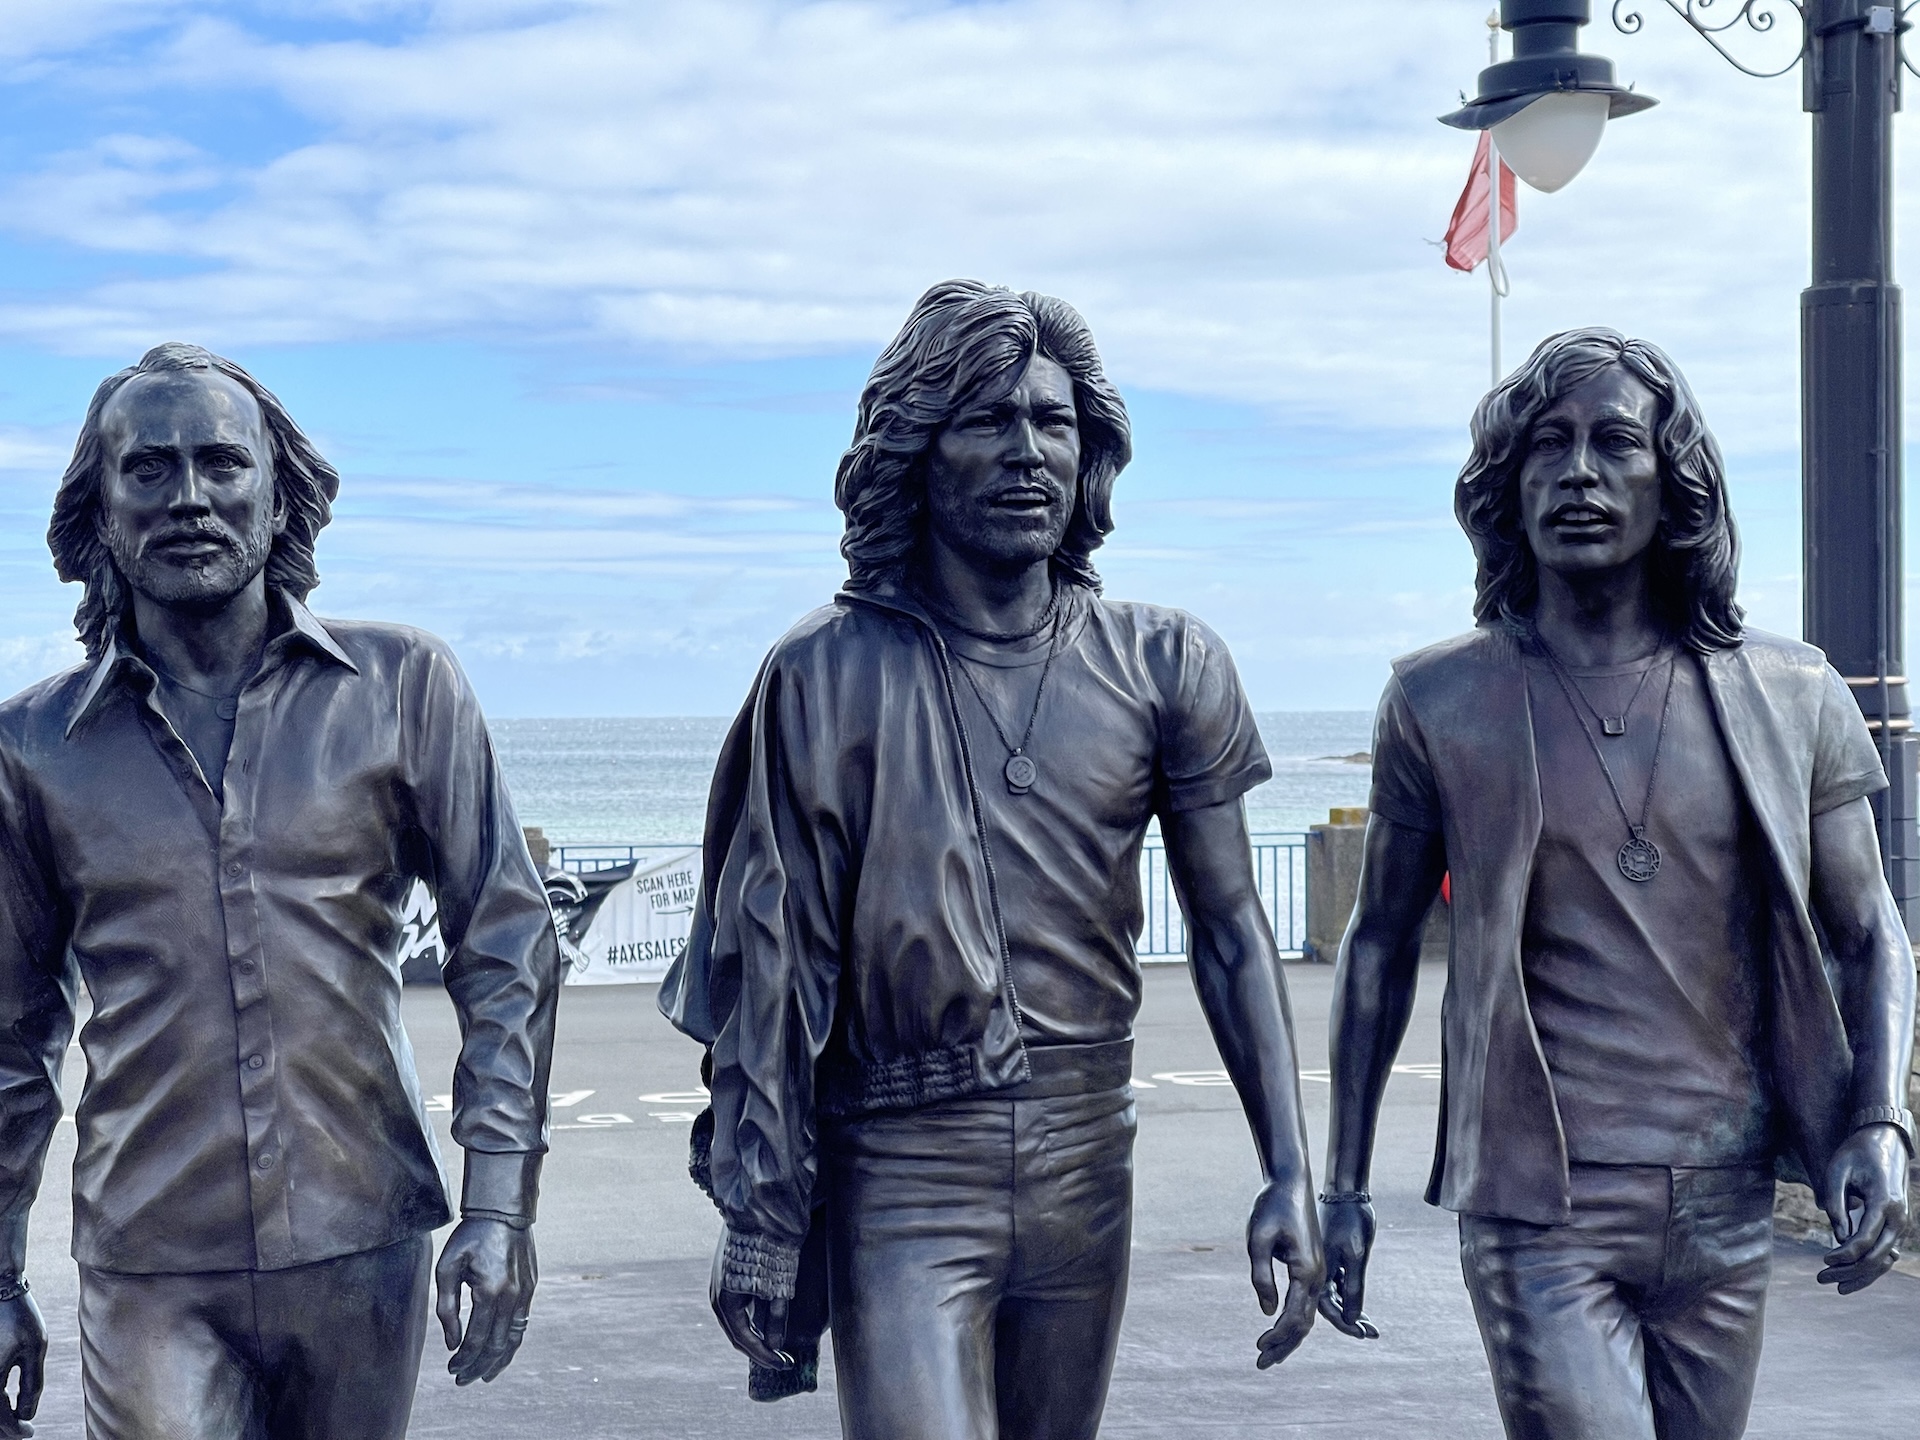 A statue of the Bee Gees by Edwards (the bee gees were born in the Isle of Man)